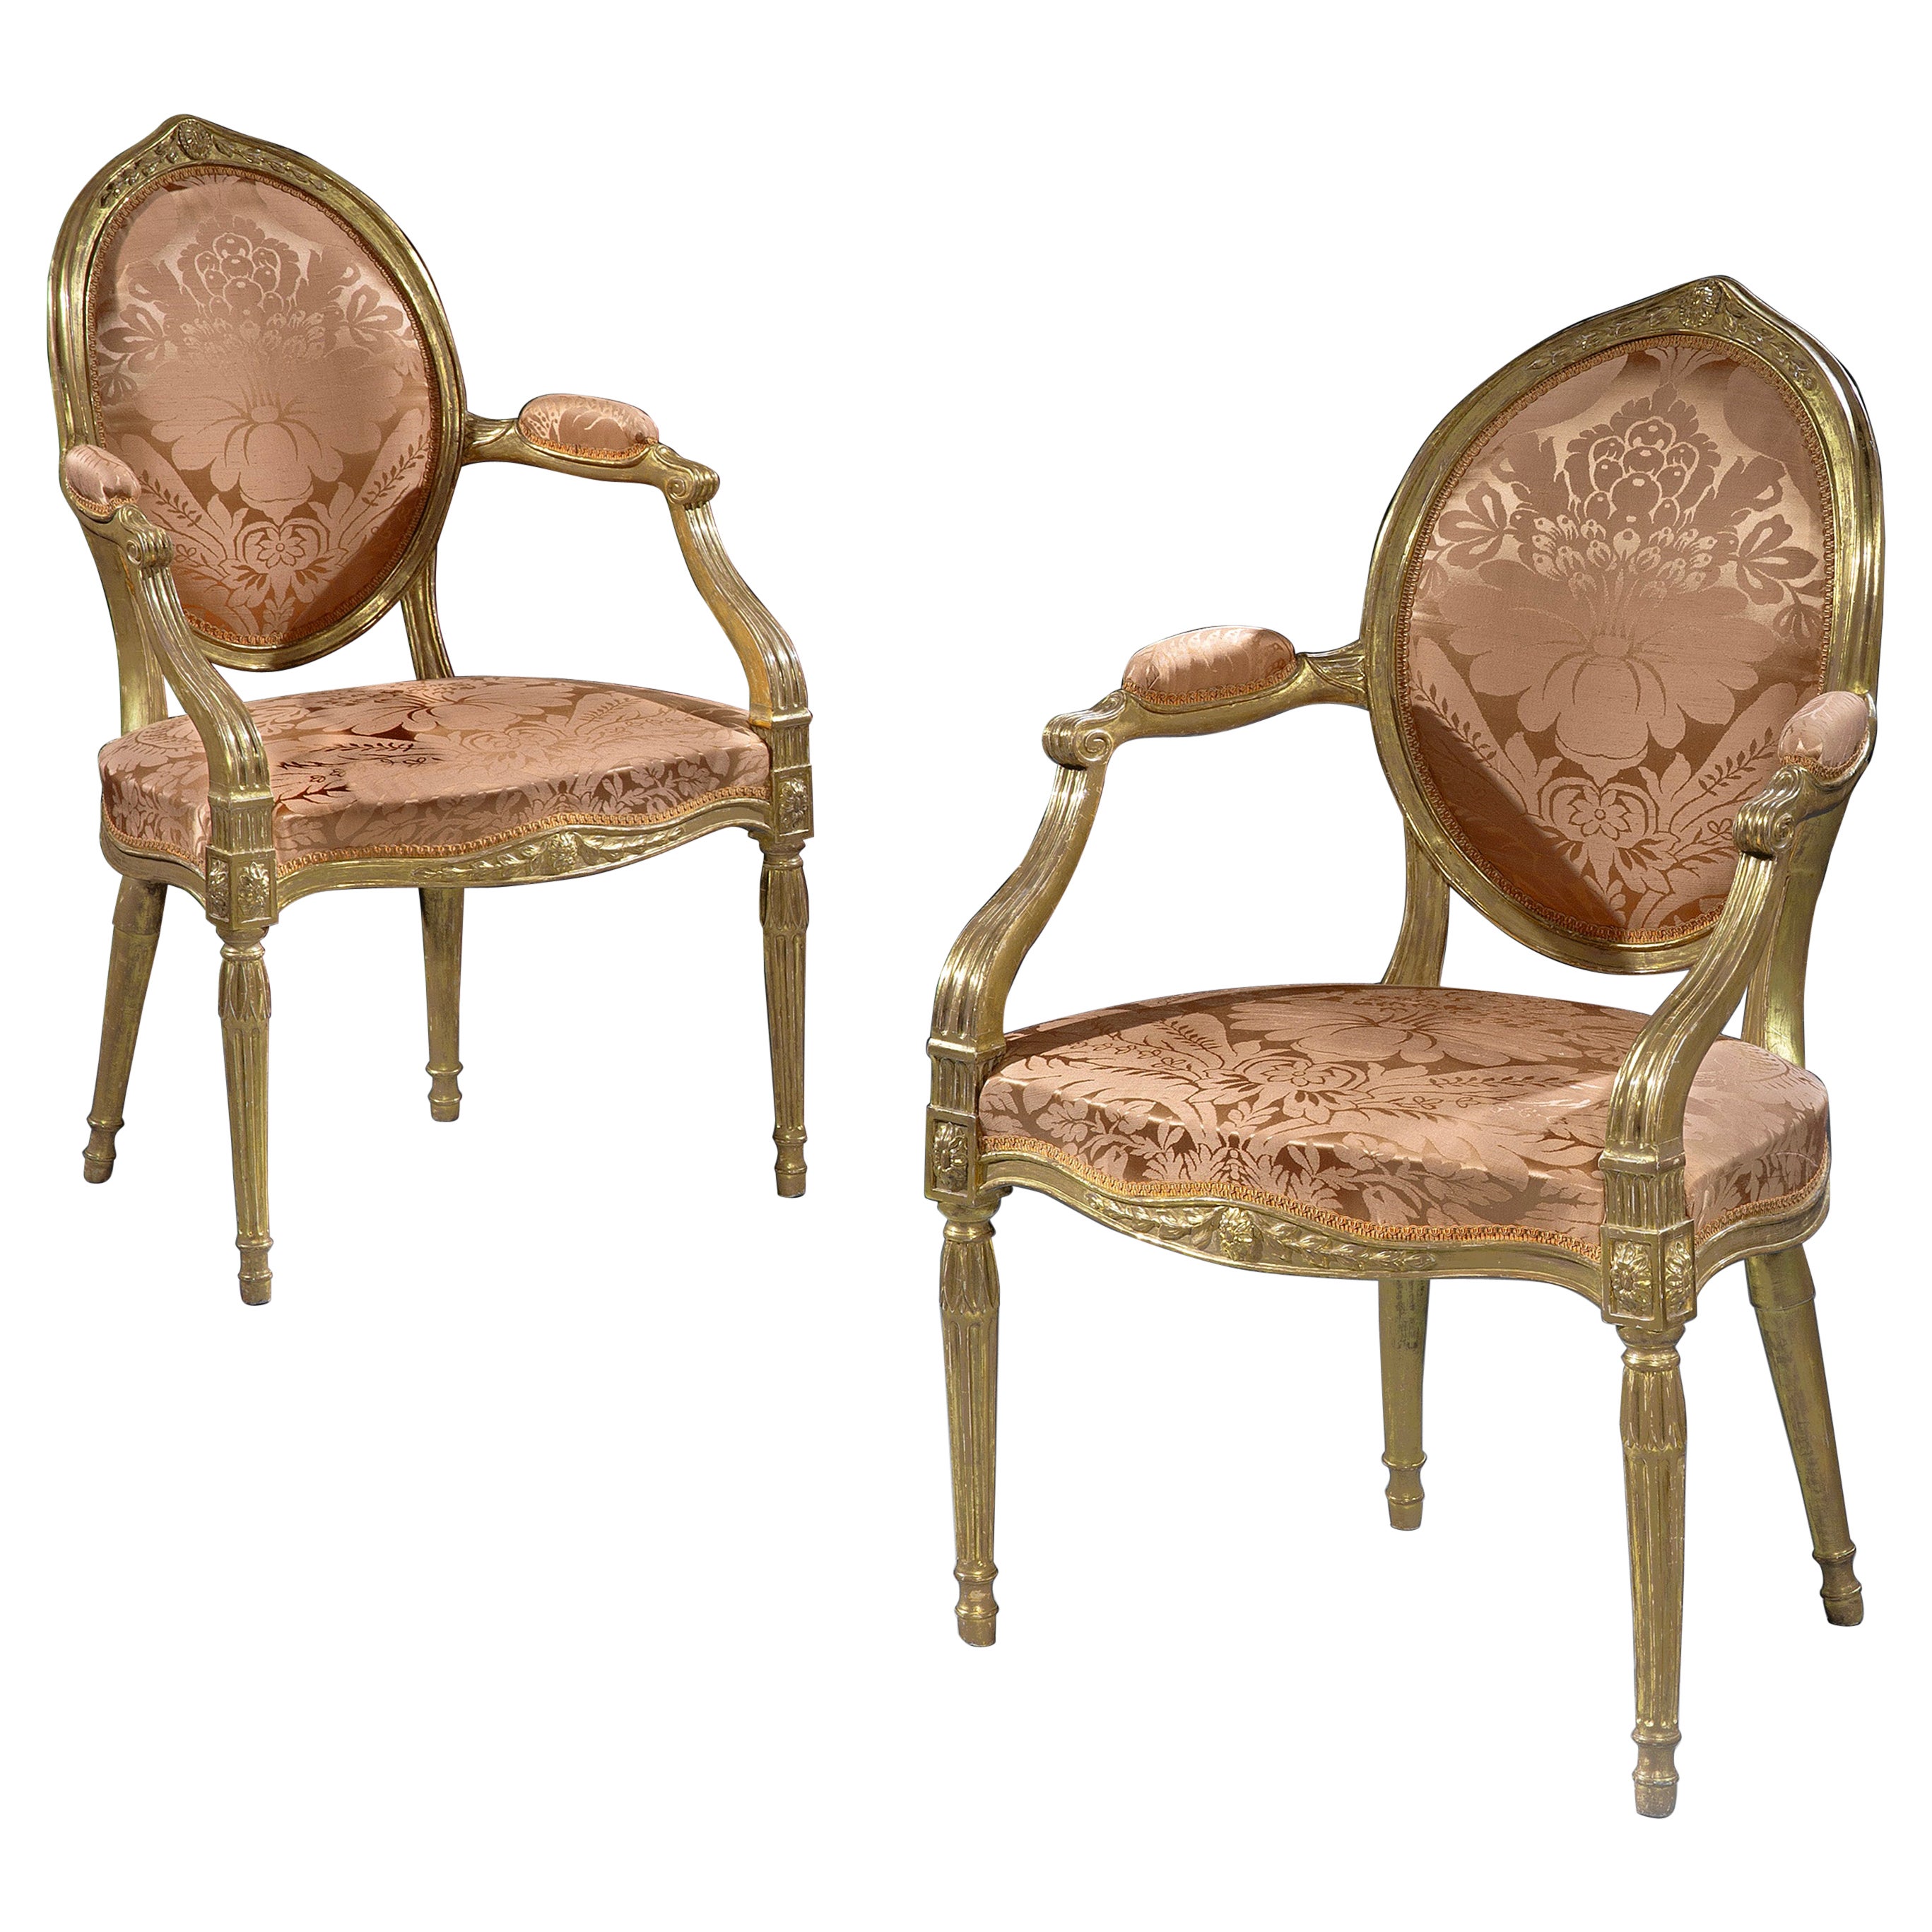 Pair of George III Neo-Classical Antique Giltwood Armchairs